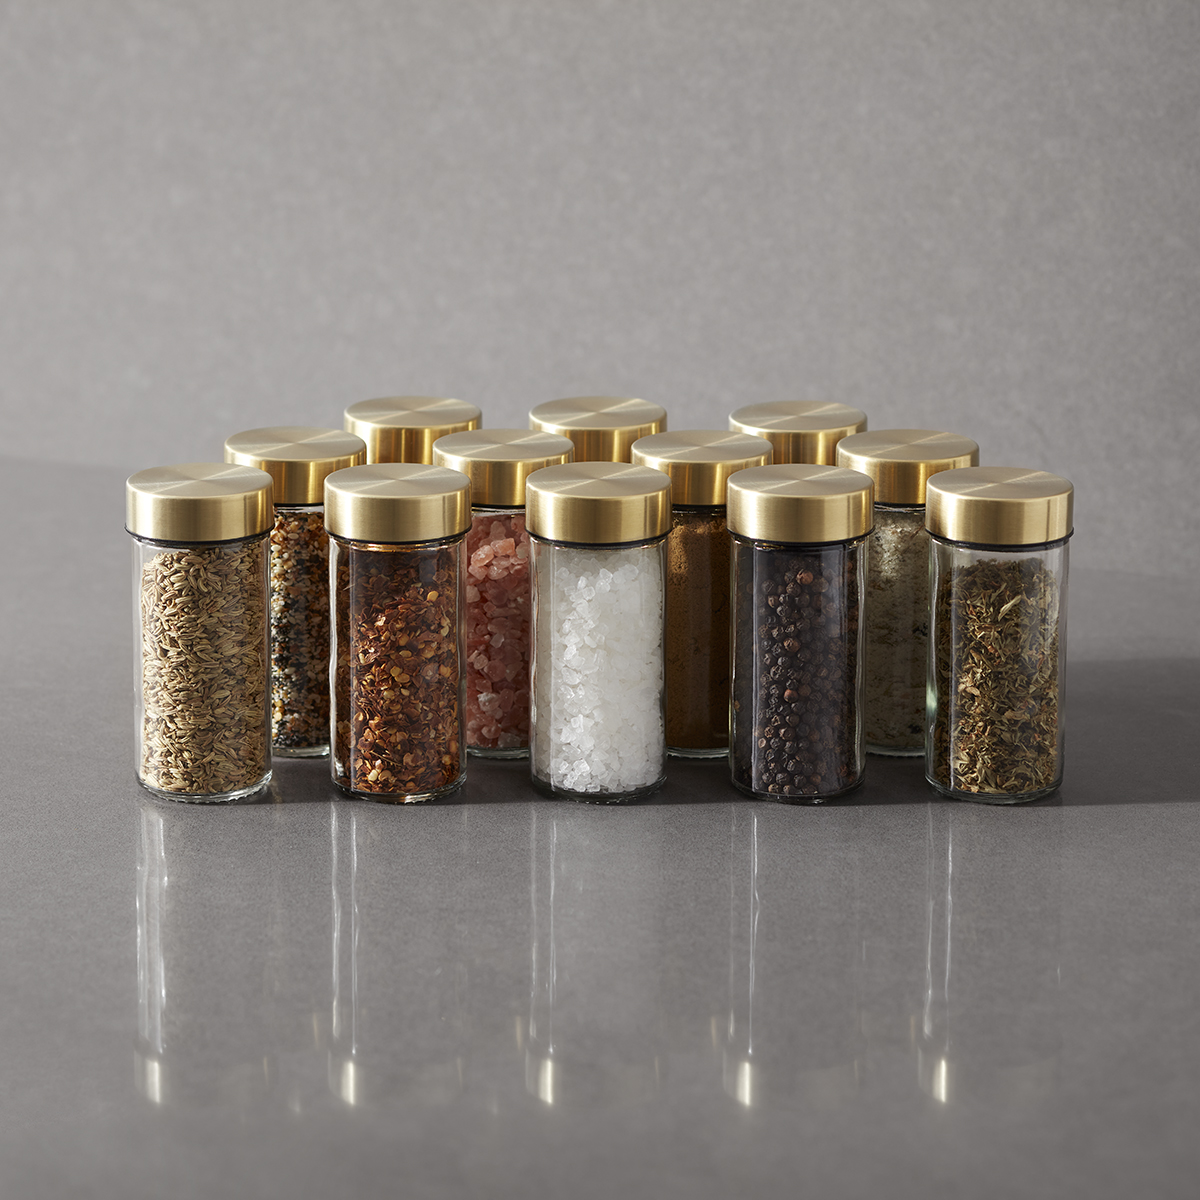 https://www.containerstore.com/catalogimages/479244/10092274-3-ounce-glass-spice-jar-gol.jpg